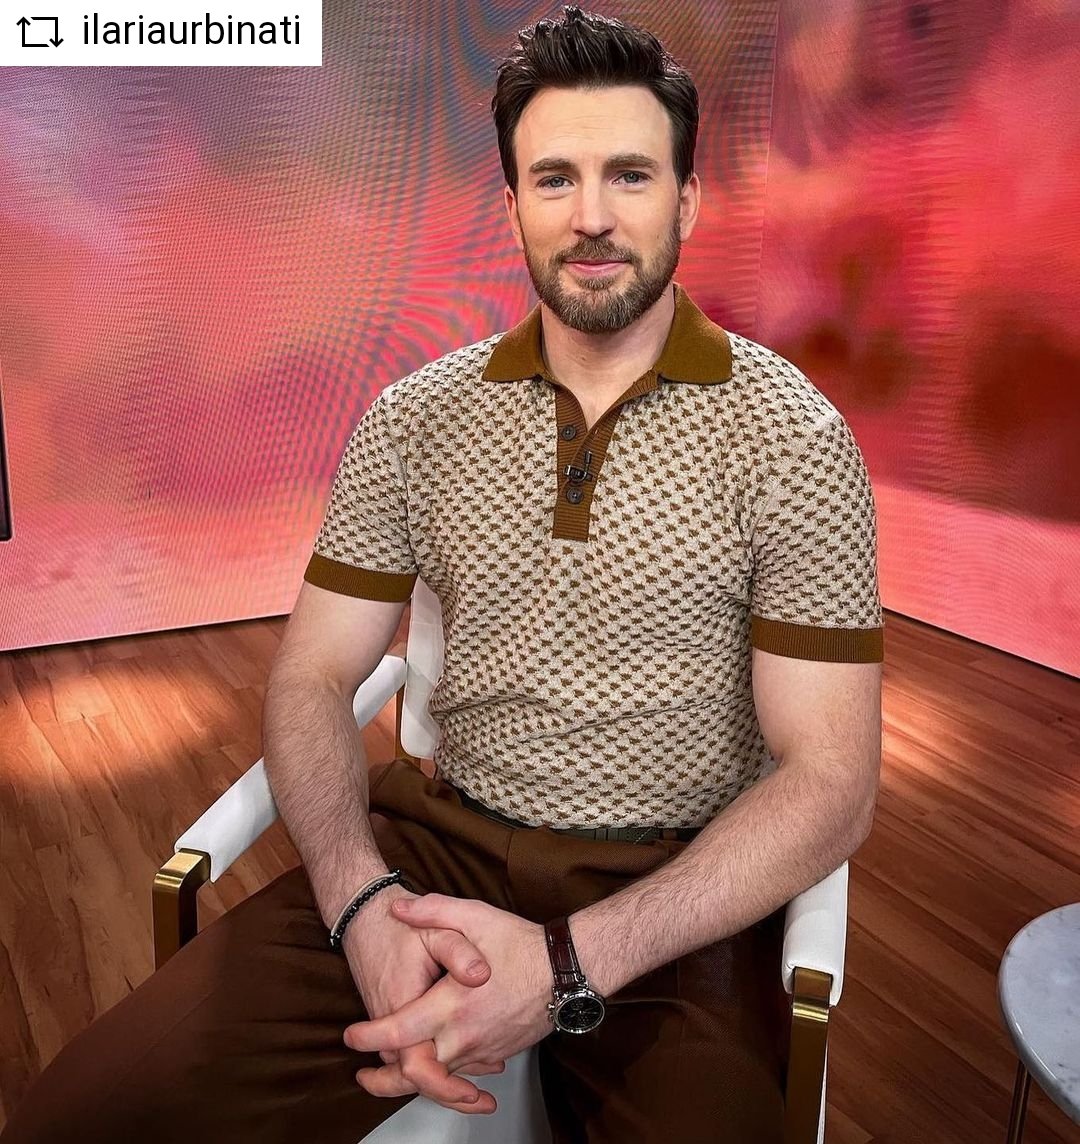 #REPOST @ilariaurbinati with @get__repost__app  @chrisevans in @kingandtuckfield with @giulivaheritage pants, @jimmychoo shoes, @londonsockco and @iwcwatches for  #Ghosted press - styled by yours truly 
#chrisevans #ilariaurbinati #ilariaurbinatistyle
instagram.com/p/CrJDFg1omV-/…